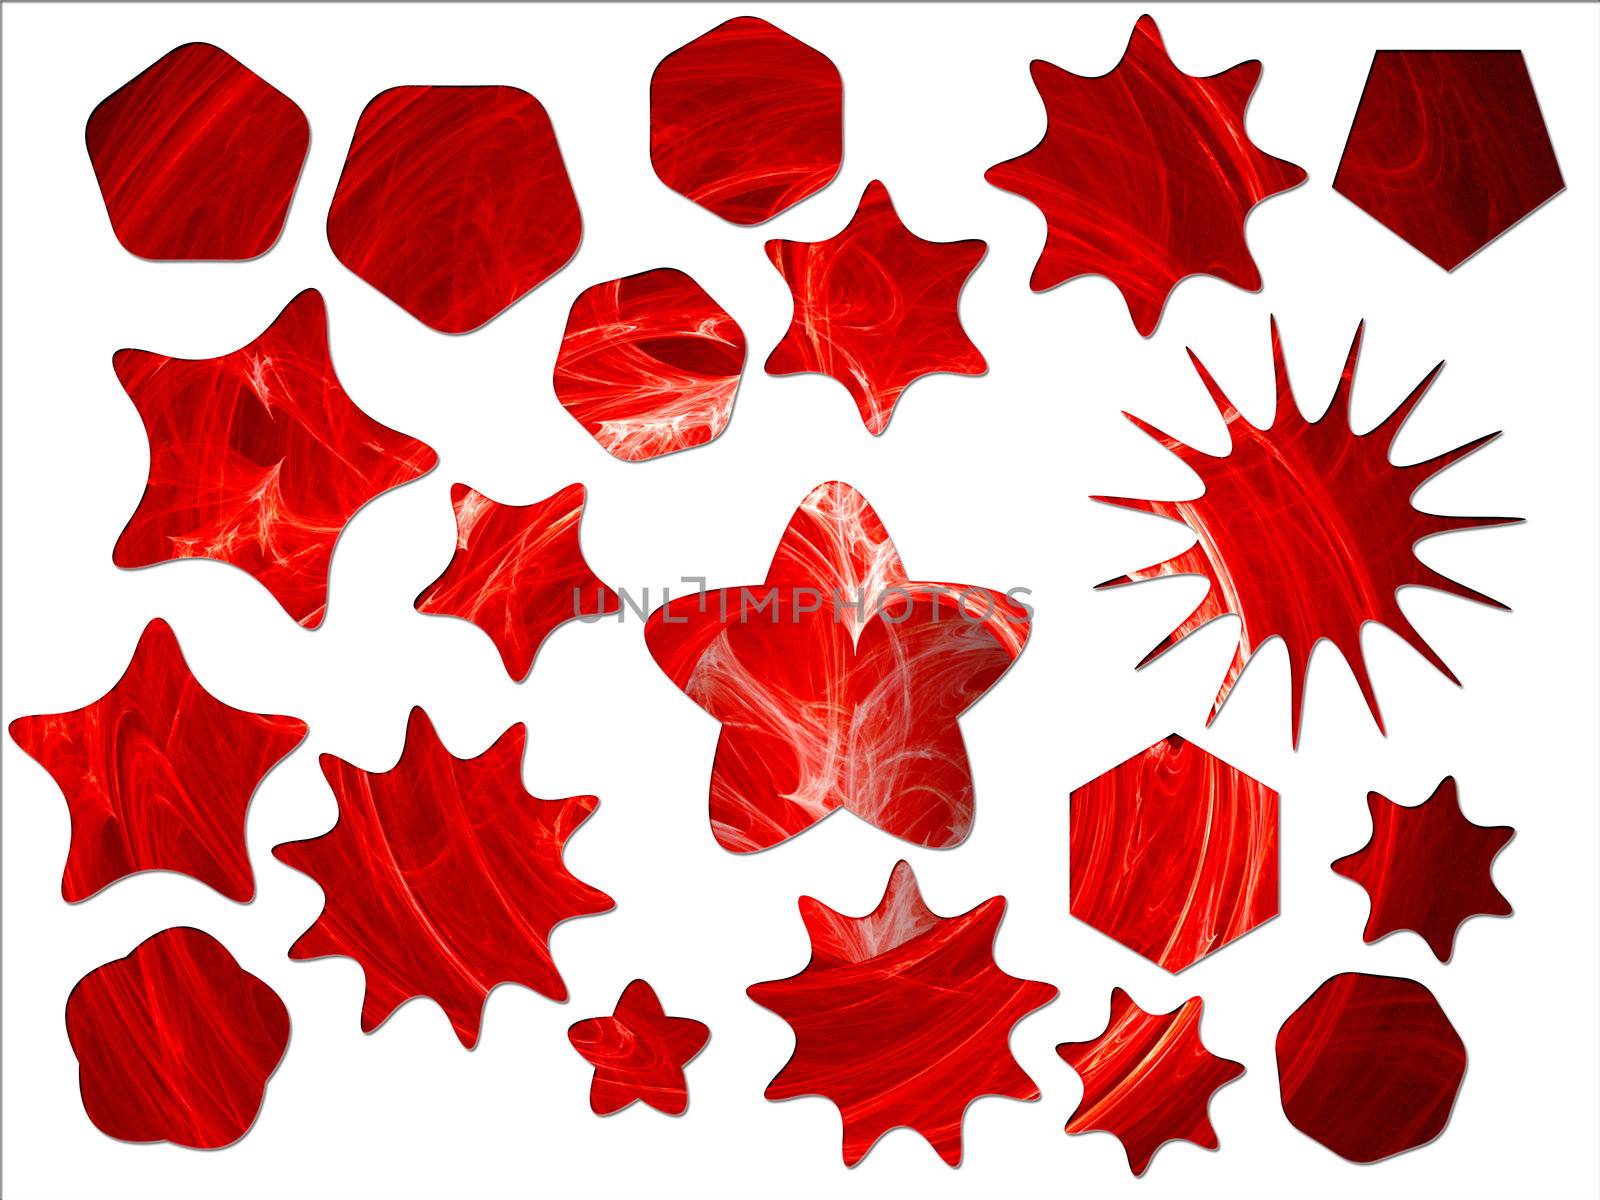 Fractal Swirly Heart on Fire Star Shapes on White Background